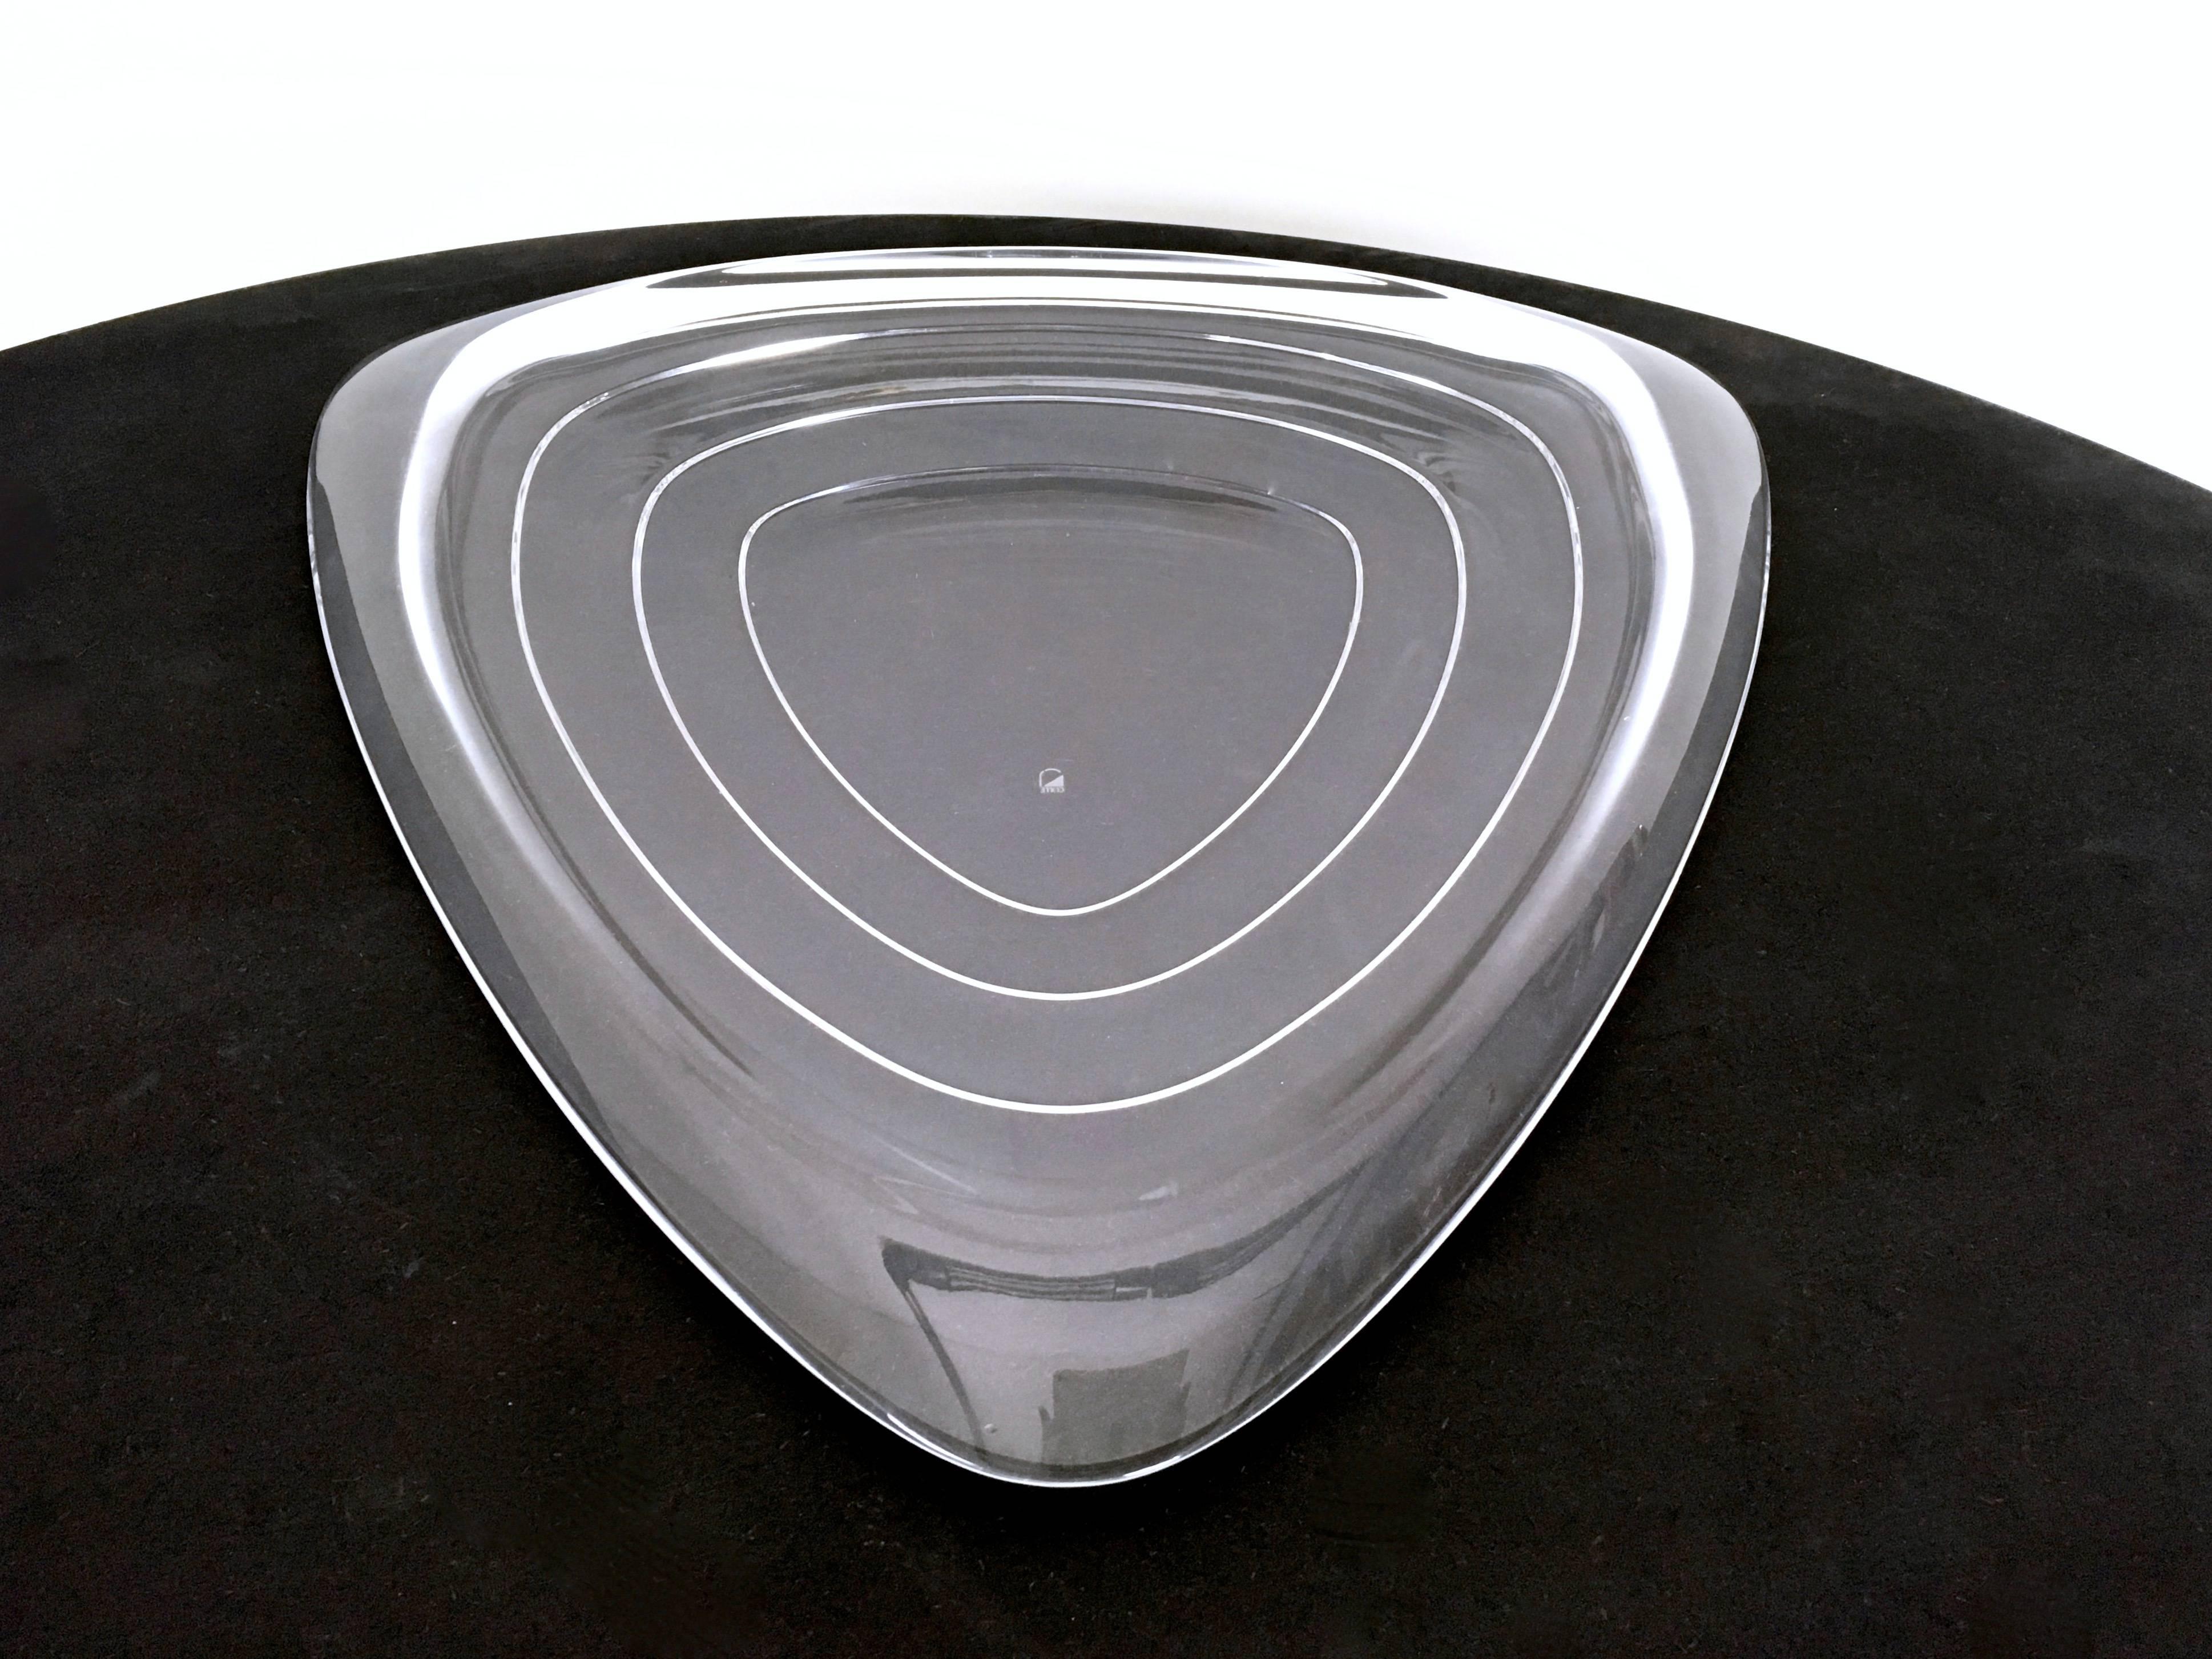 Italian Modern Triangular Glass Plate by Angelo Mangiarotti for Cristallerie Colle 1990s For Sale